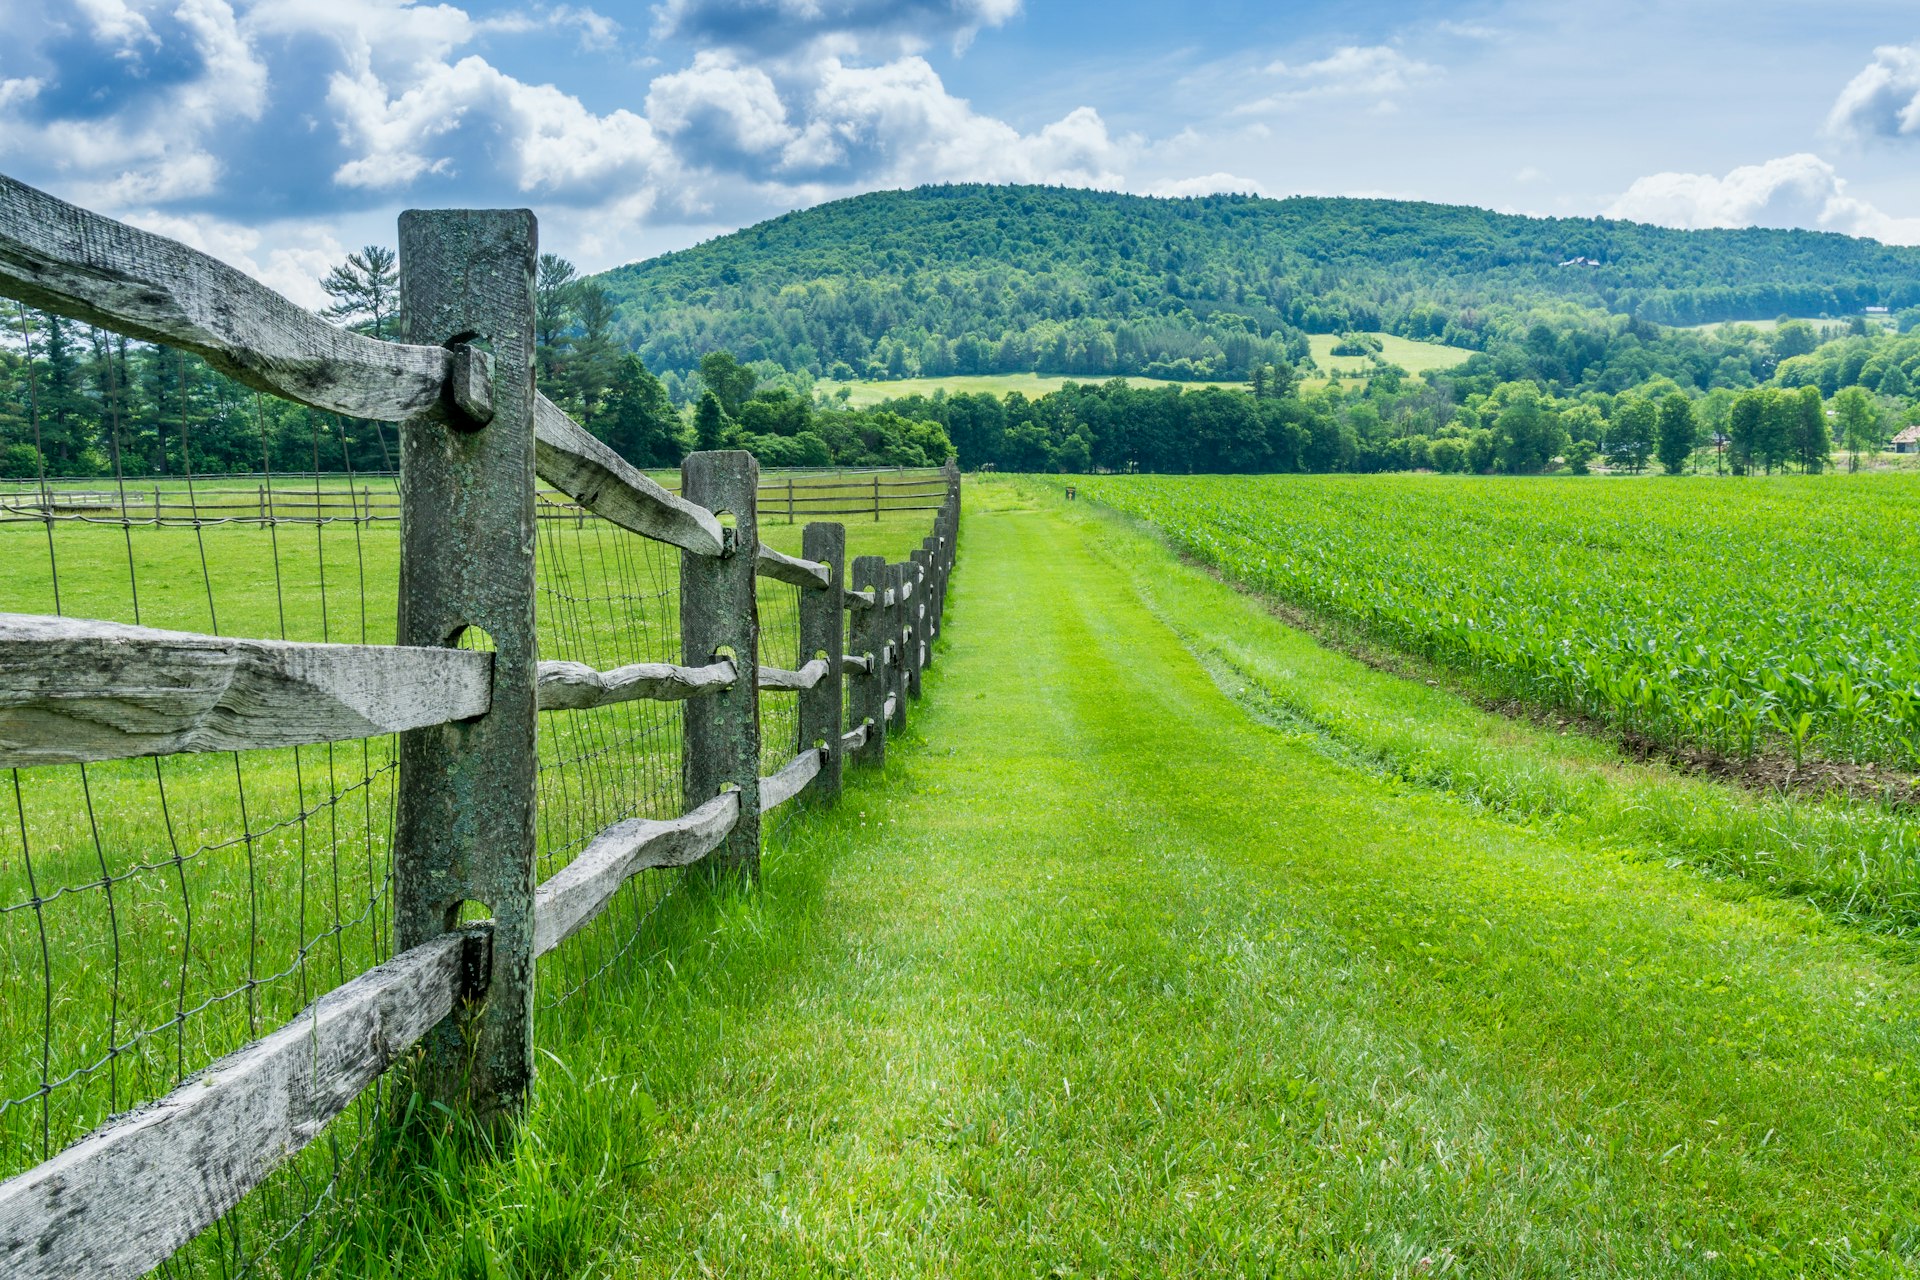 A green field with a long wood and wire fence and a mountain in the background